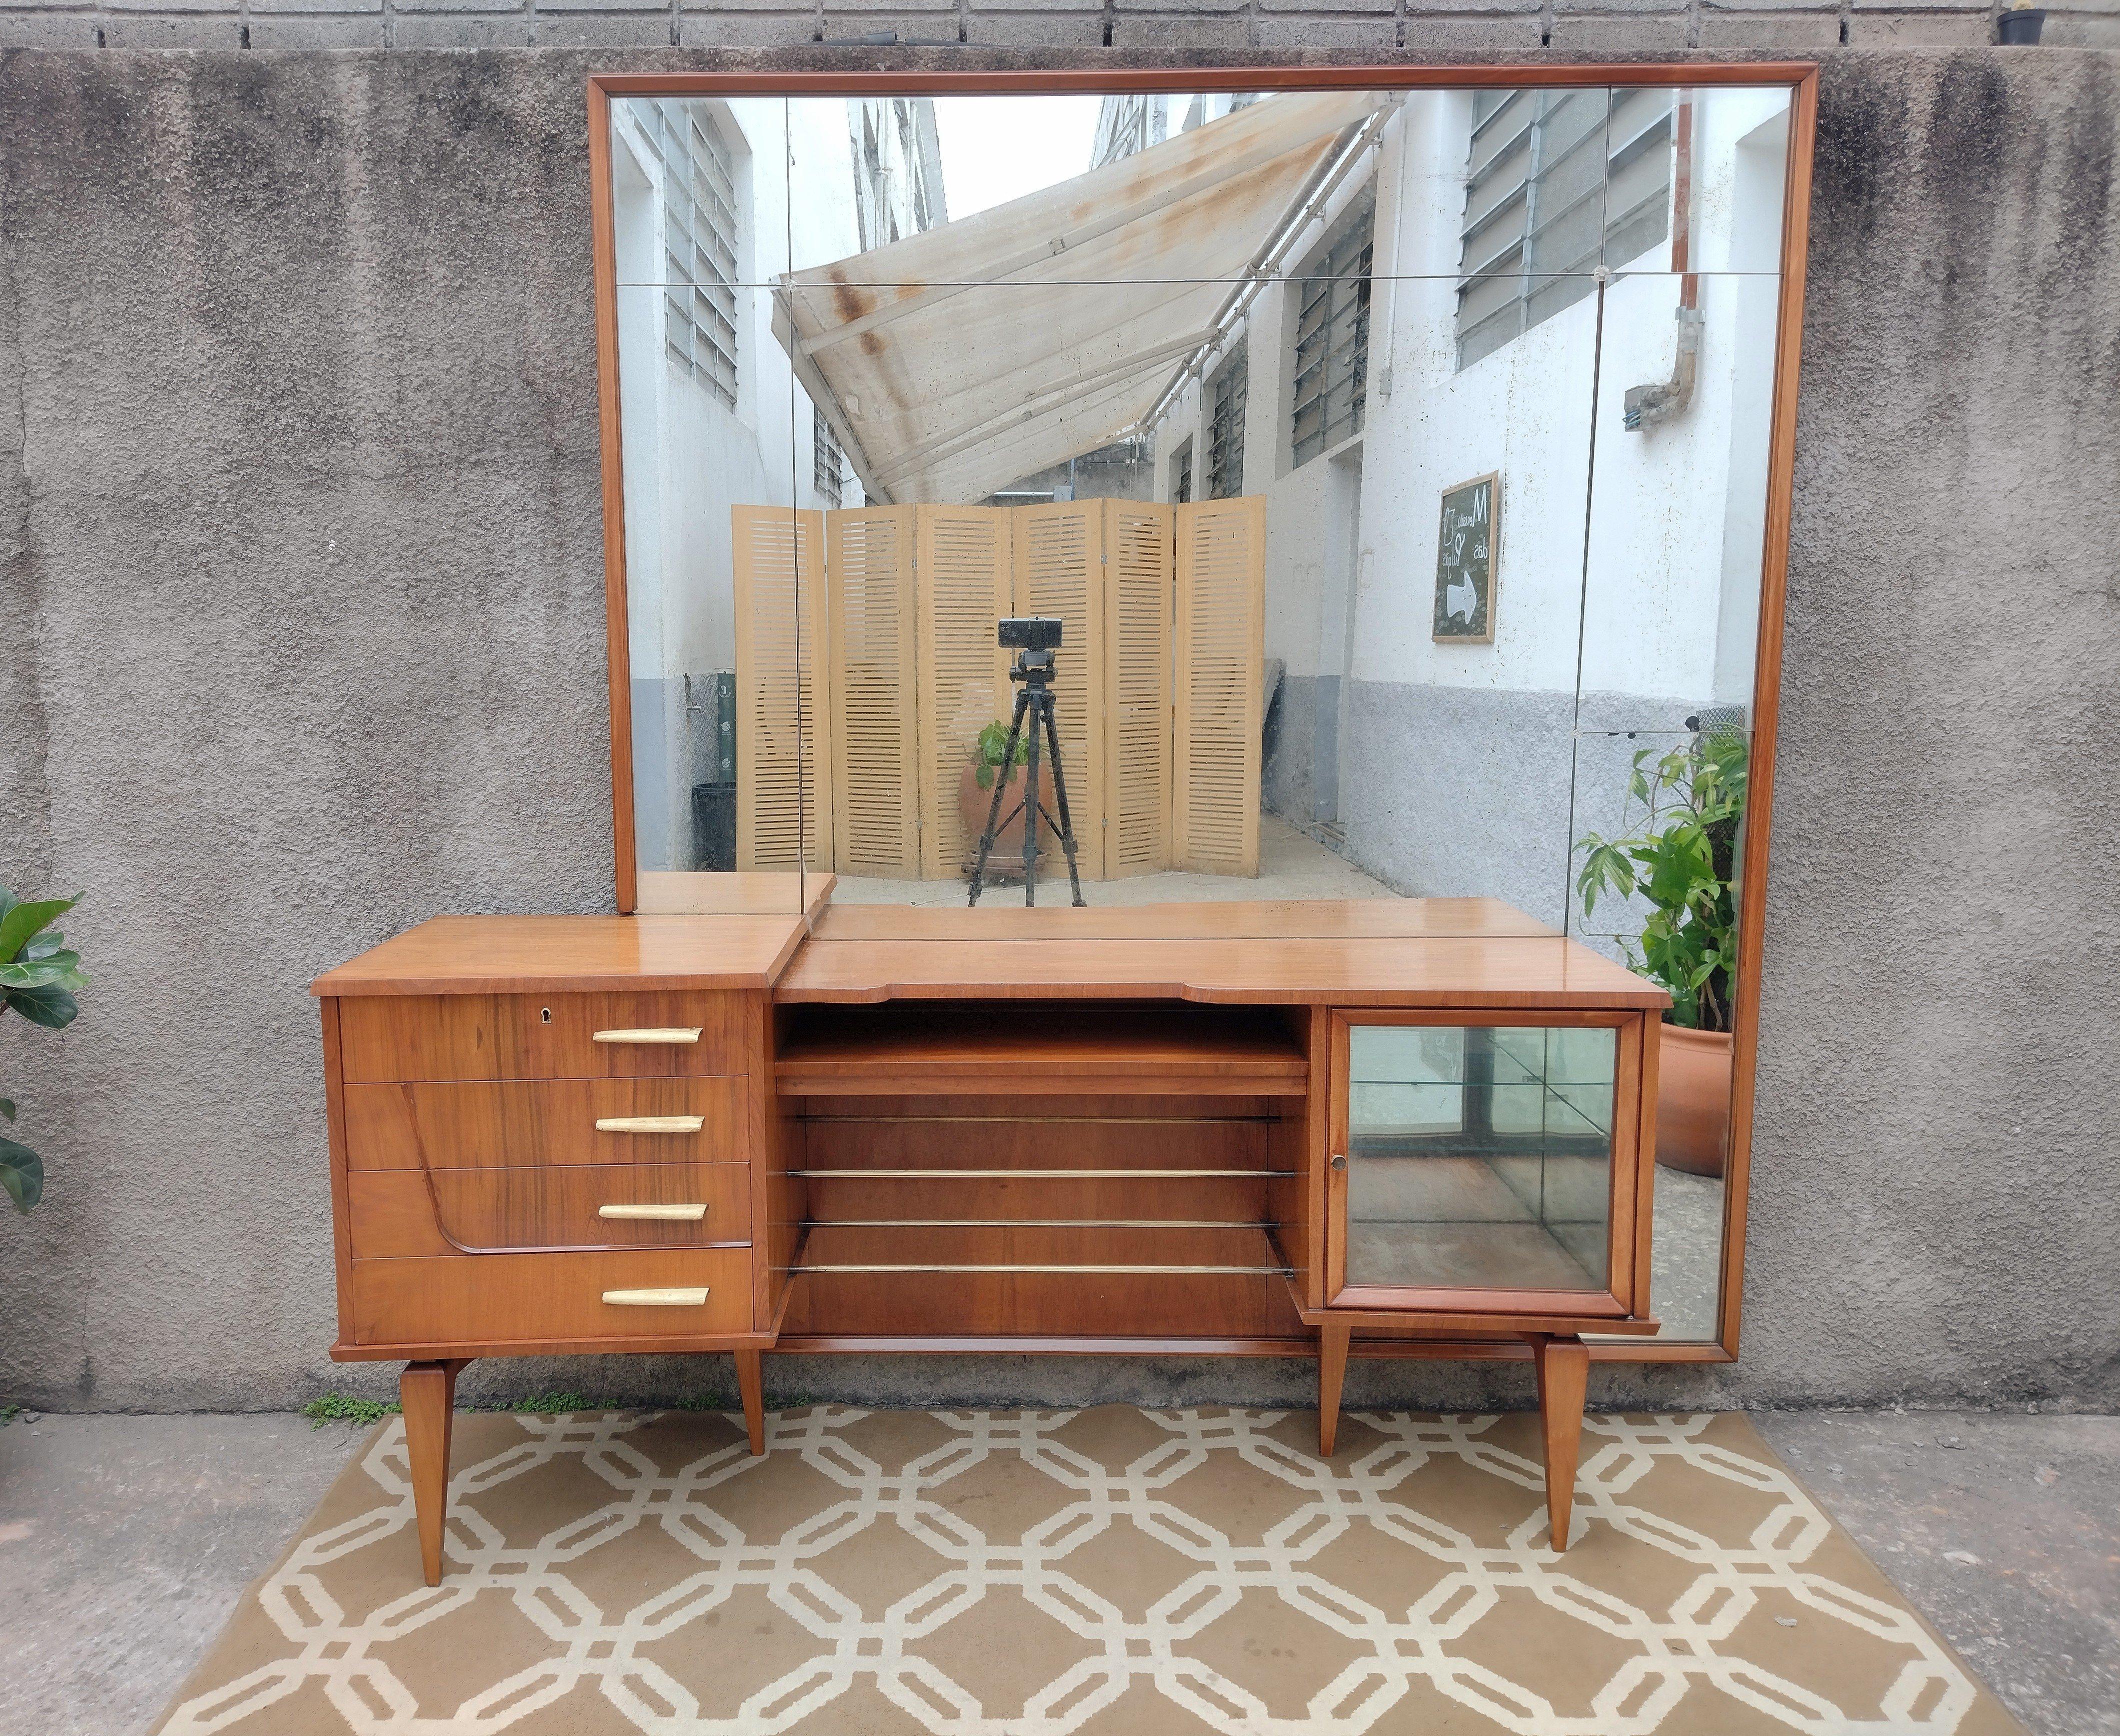 Mid-Century Modern Brazilian dressing table with structure in solid wood veneered in Caviuna wood (a type of Jacaranda Rosewood), recently restored. It has a wide modular mirror, 4 drawers with iron handles, all of which are easy to open/close. The